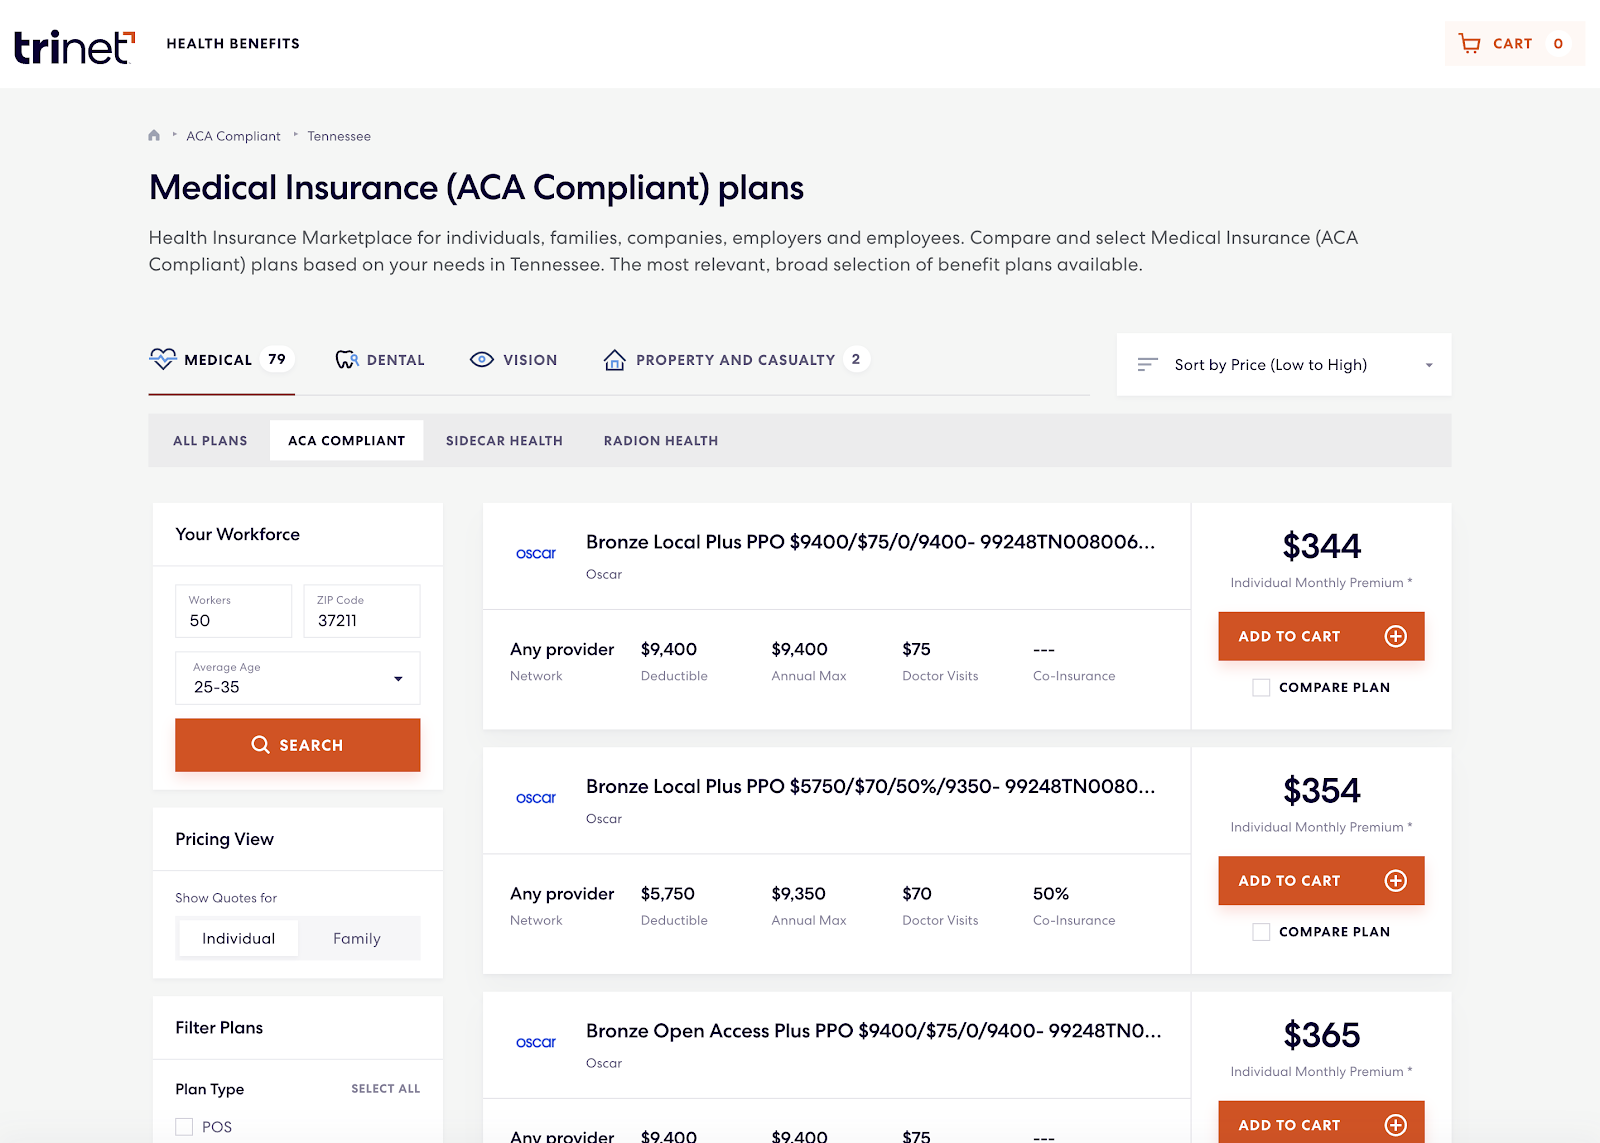 TriNet’s Health Insurance Marketplace displays a dashboard with a list of ACA-compliant medical insurance plans with filters, like the number of workers, zip code, and employee average age filters, on the right to refine your search.